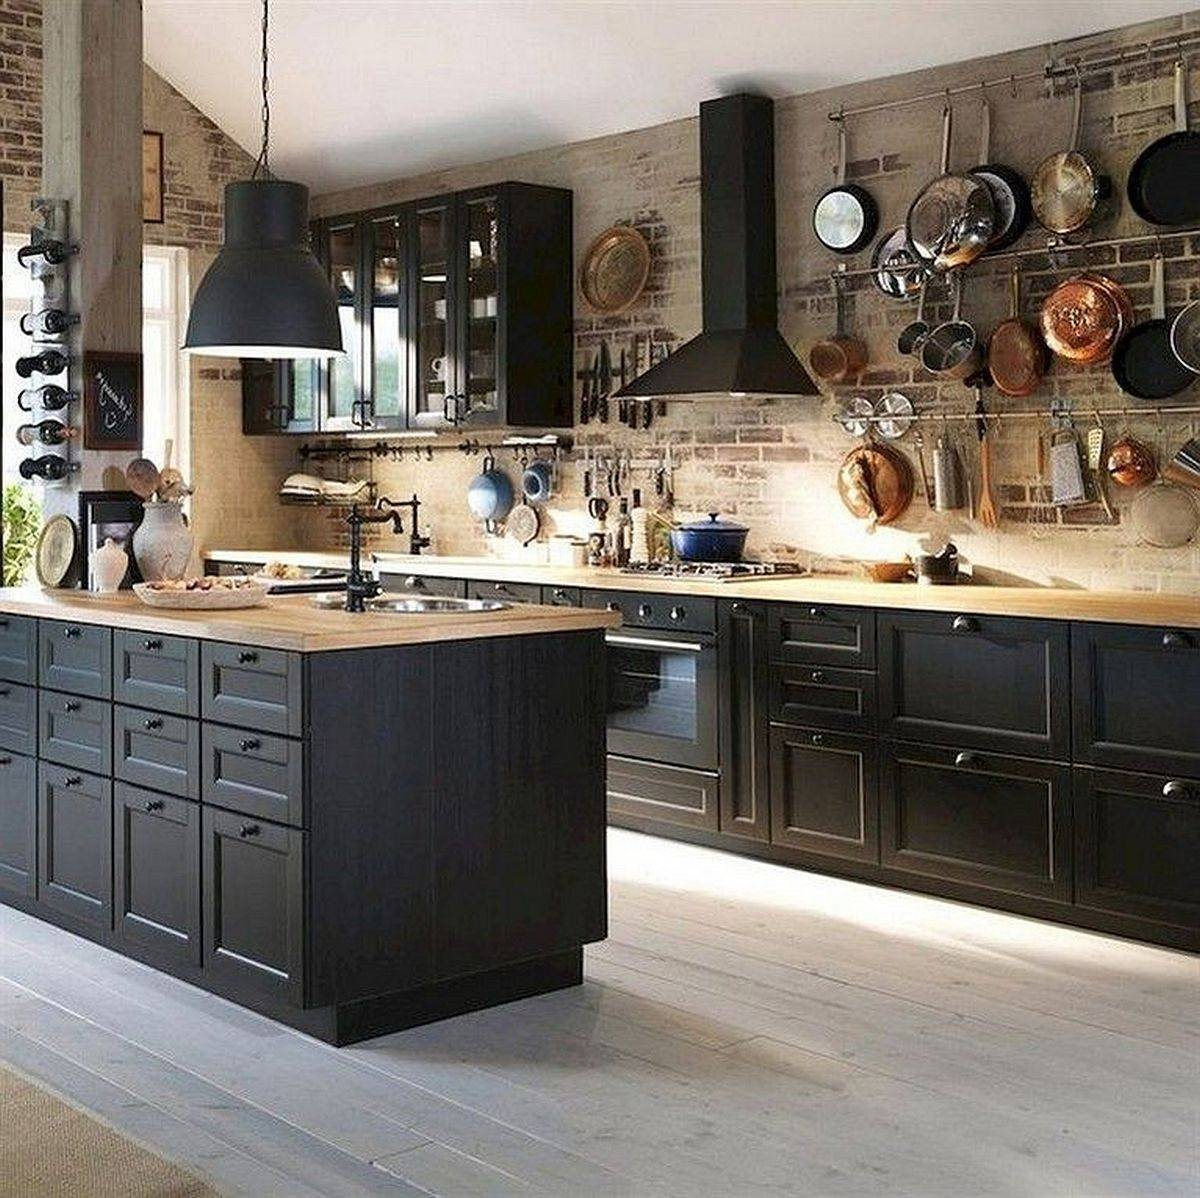 timeless-kitchen-with-brick-walls-and-black-wood-cabinets-along-with-wooden-countertops-82921.jpg